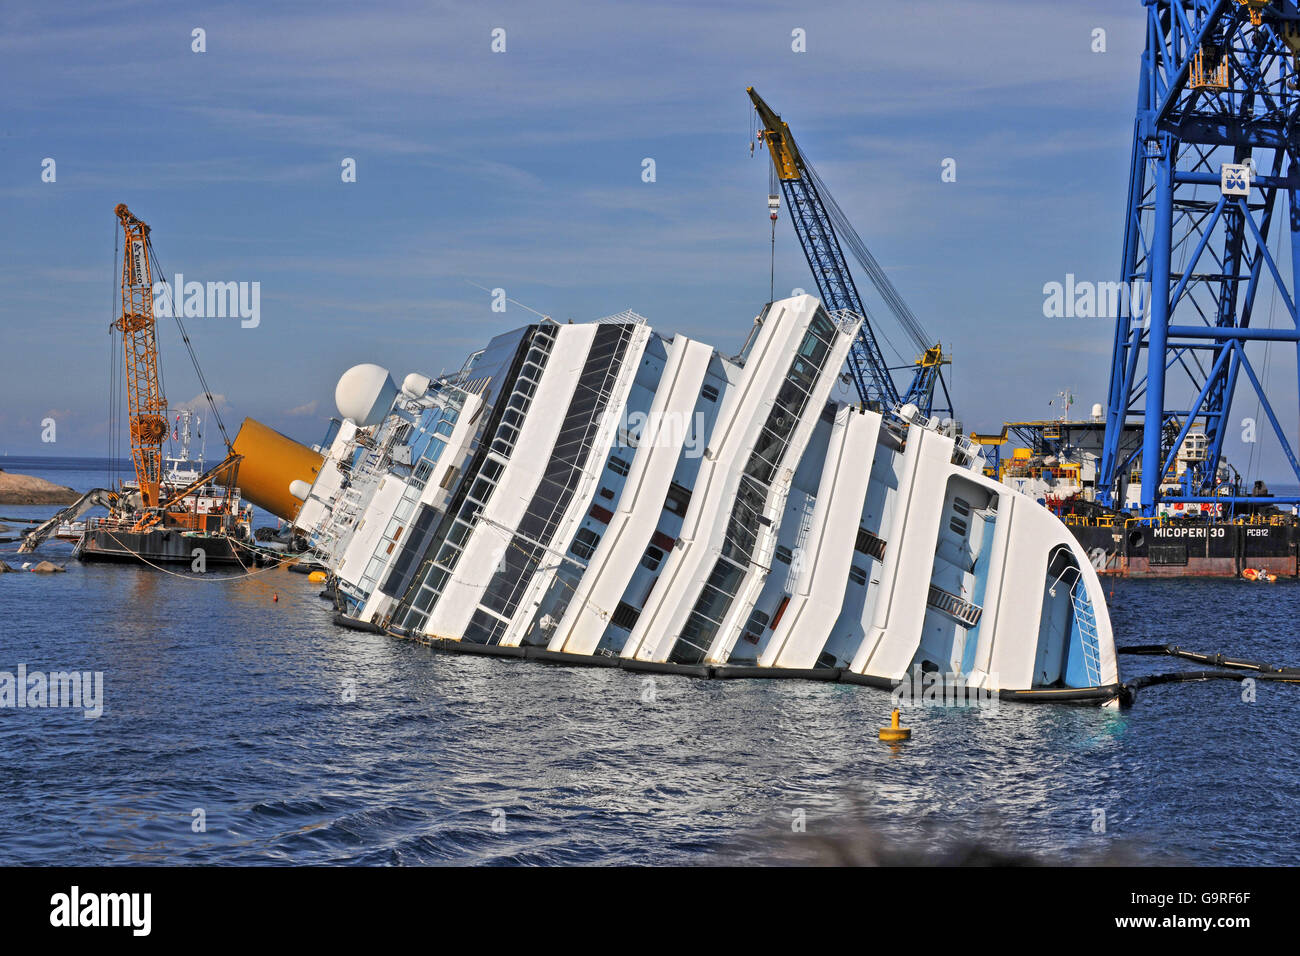 Recovery Work At Sinking Cruise Liner Costa Concordia At